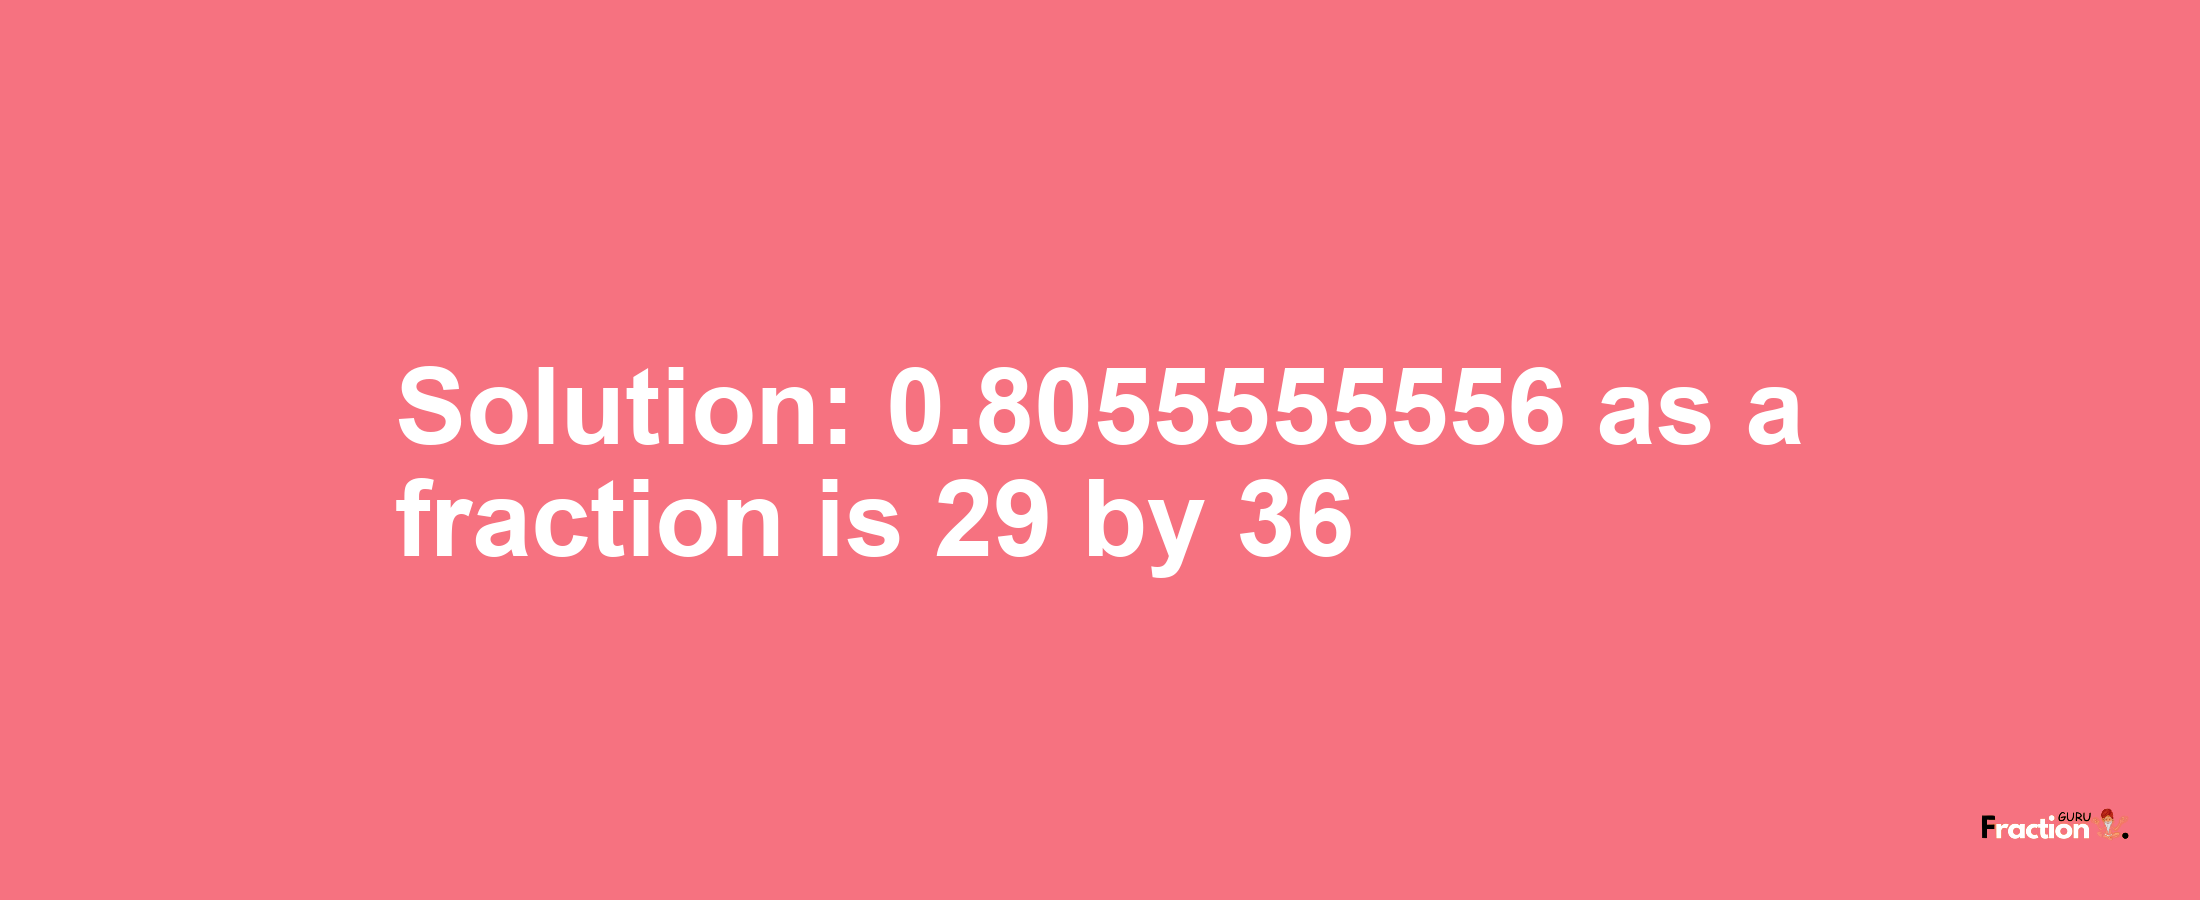 Solution:0.8055555556 as a fraction is 29/36